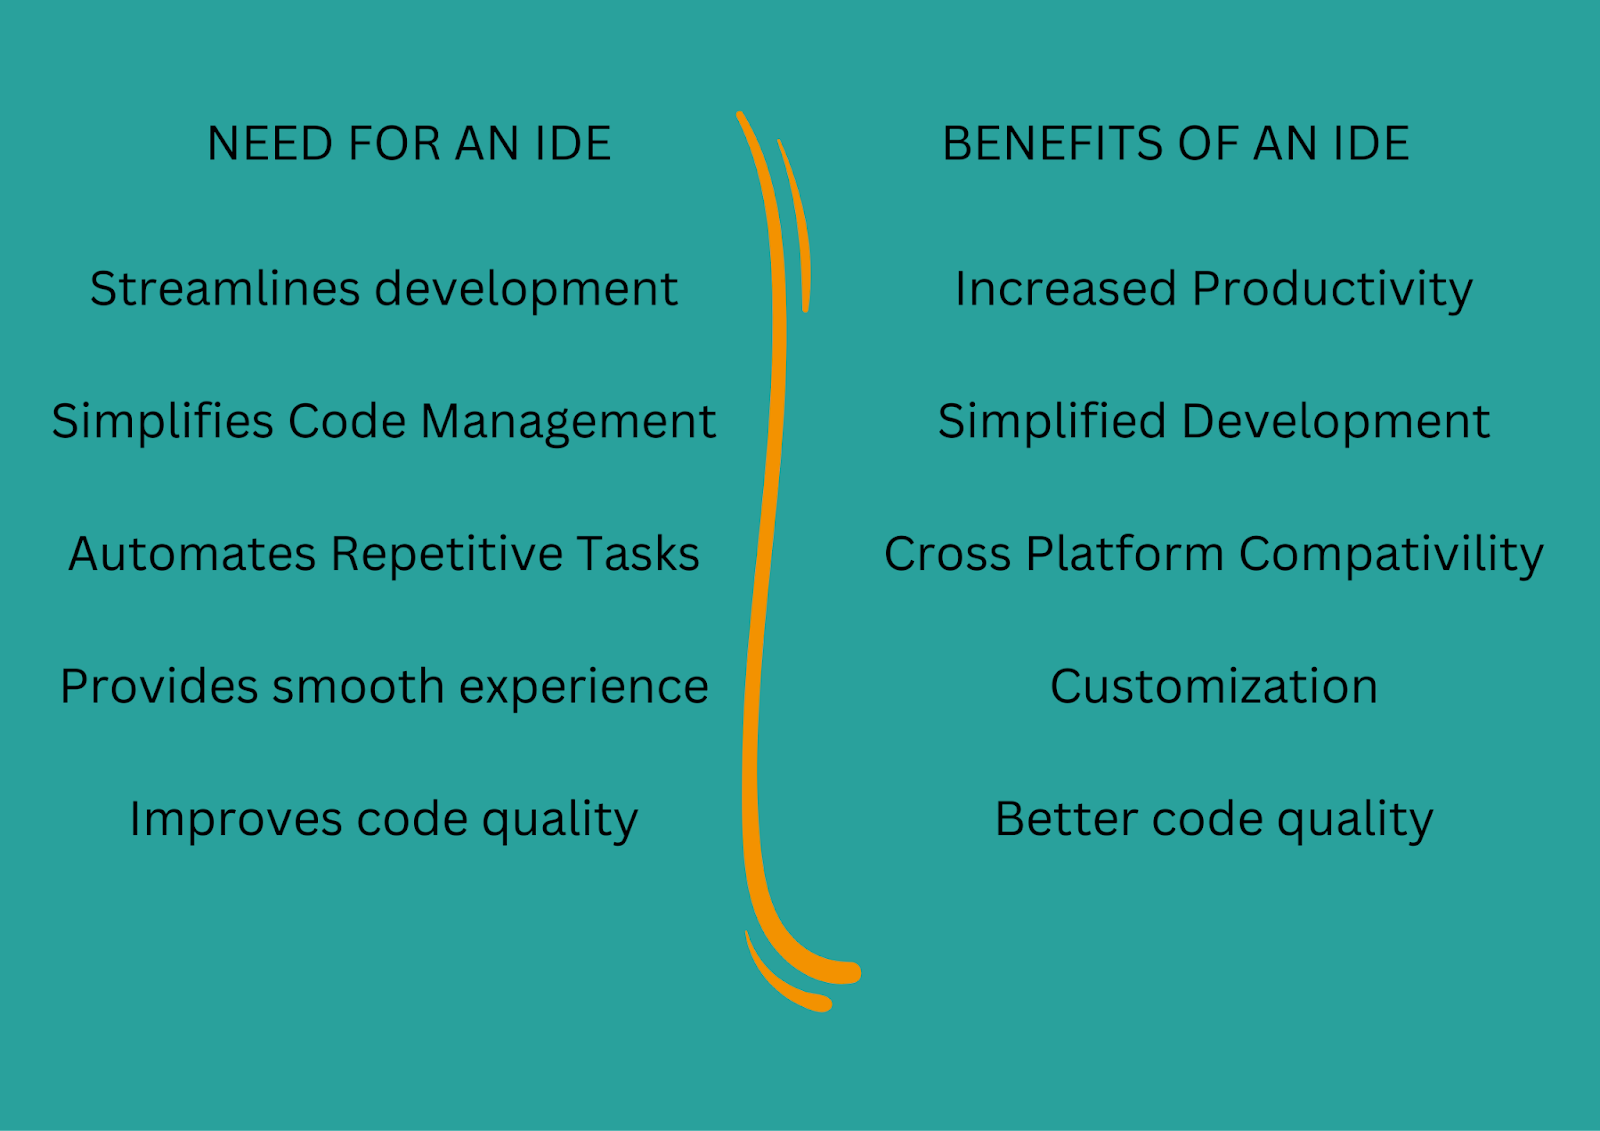 The list of need and benefits of an IDE